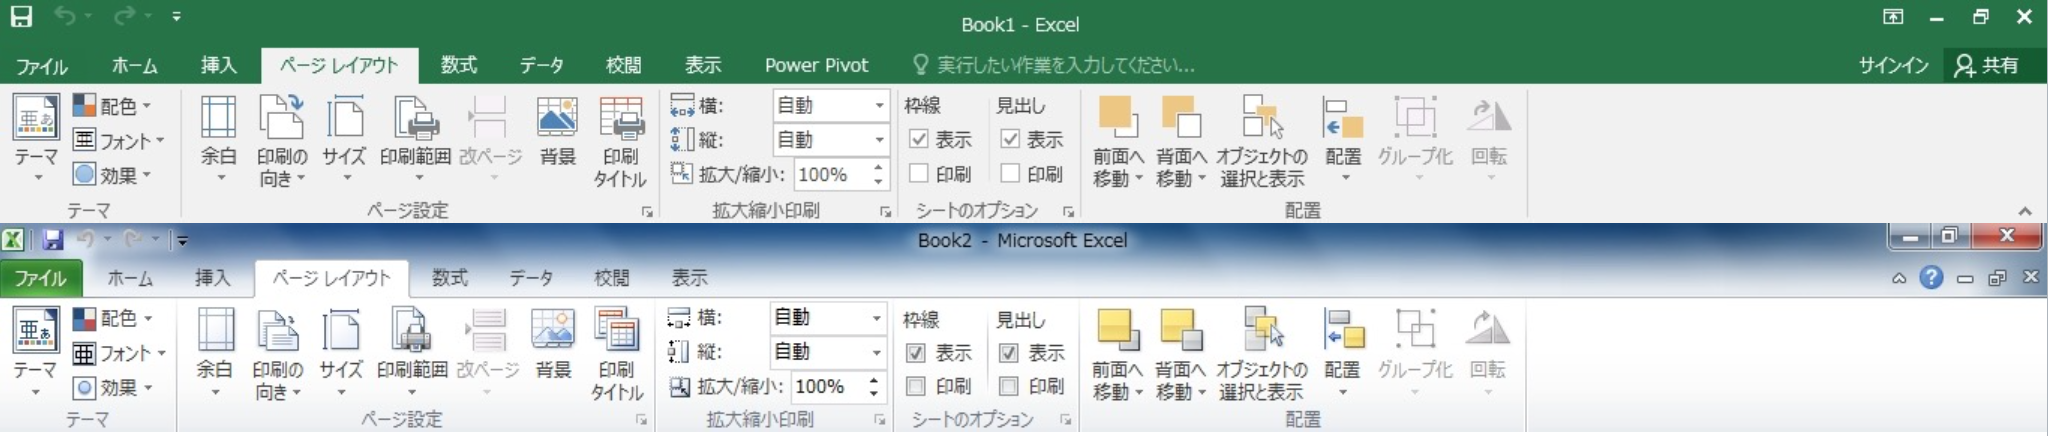 Excel2016とExcel2010のページレイアウトタブ